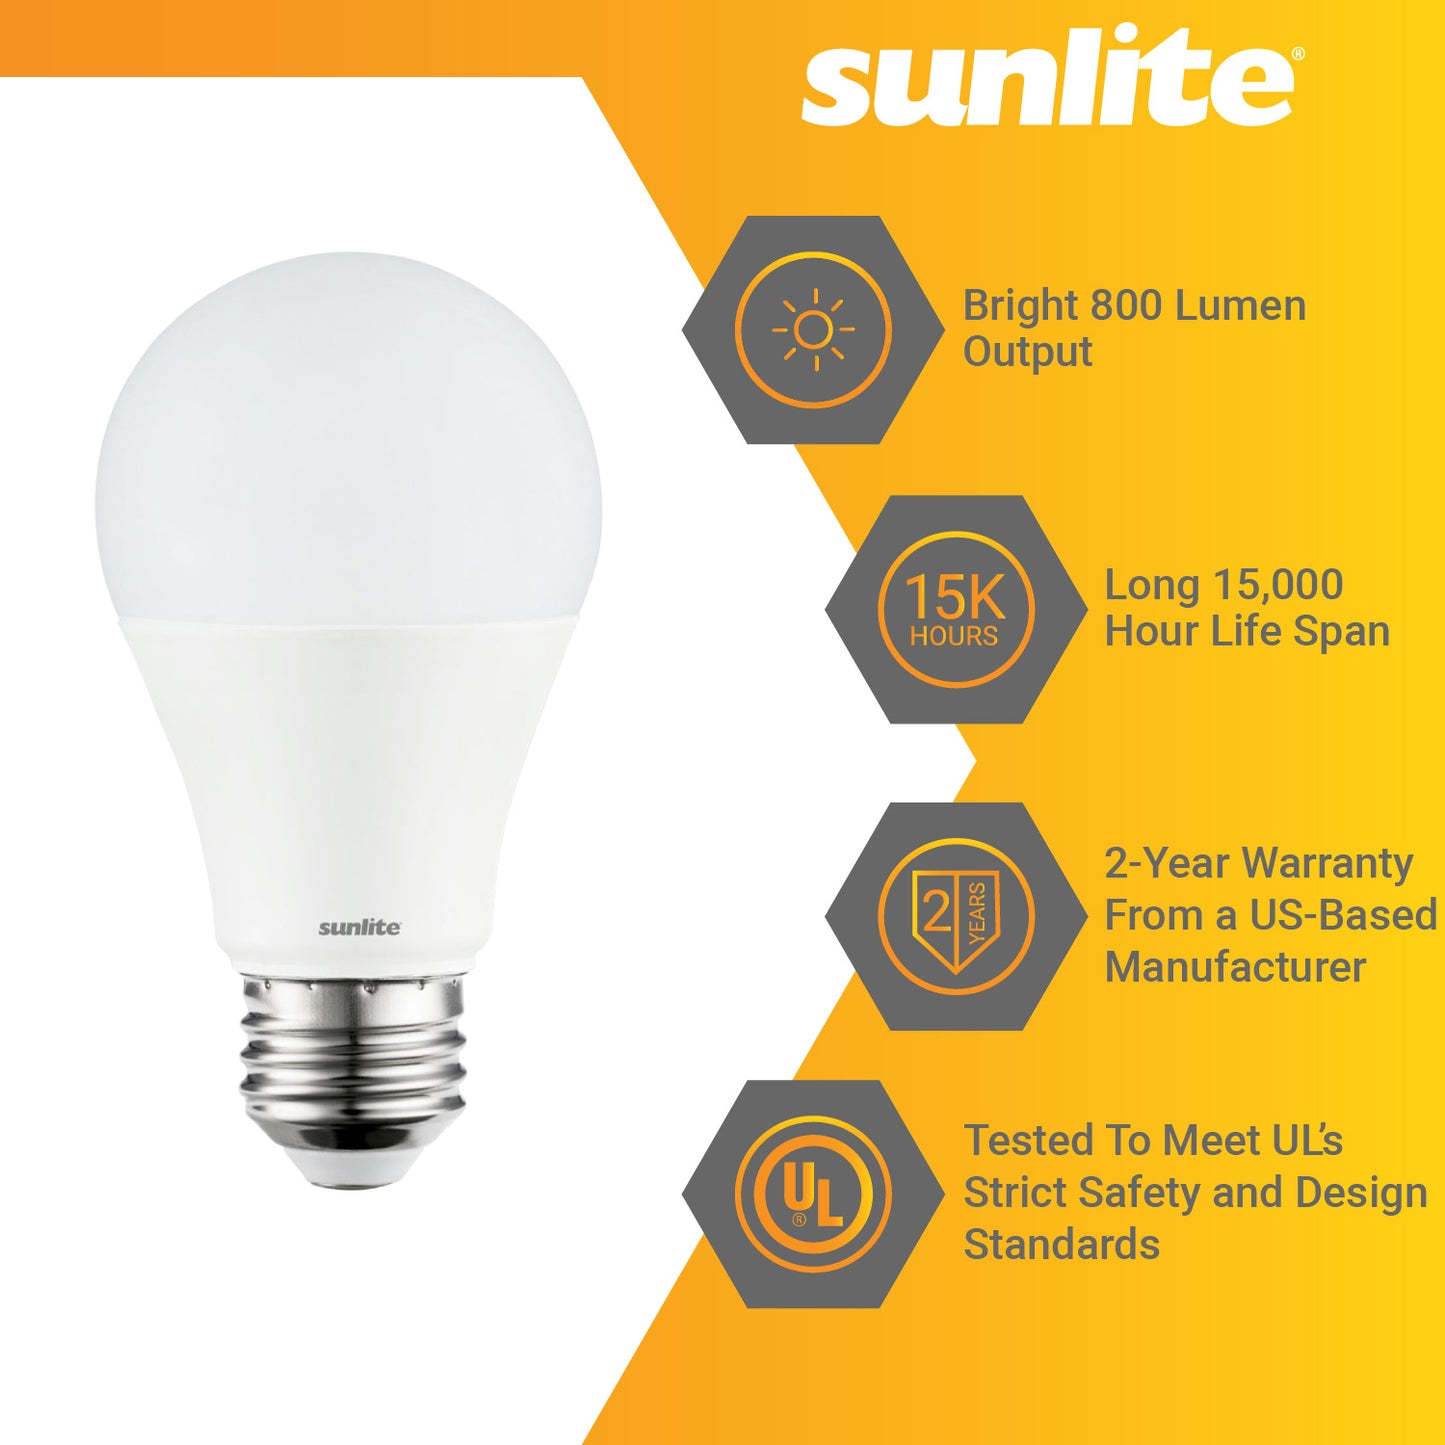 Sunlite 80688-SU 3-Pack LED A19 Light Bulbs, 9 Watts (60W Equivalent), Medium Base (E26), Non-Dimmable, Frost, UL Listed, 40K - Cool White 3 Pack